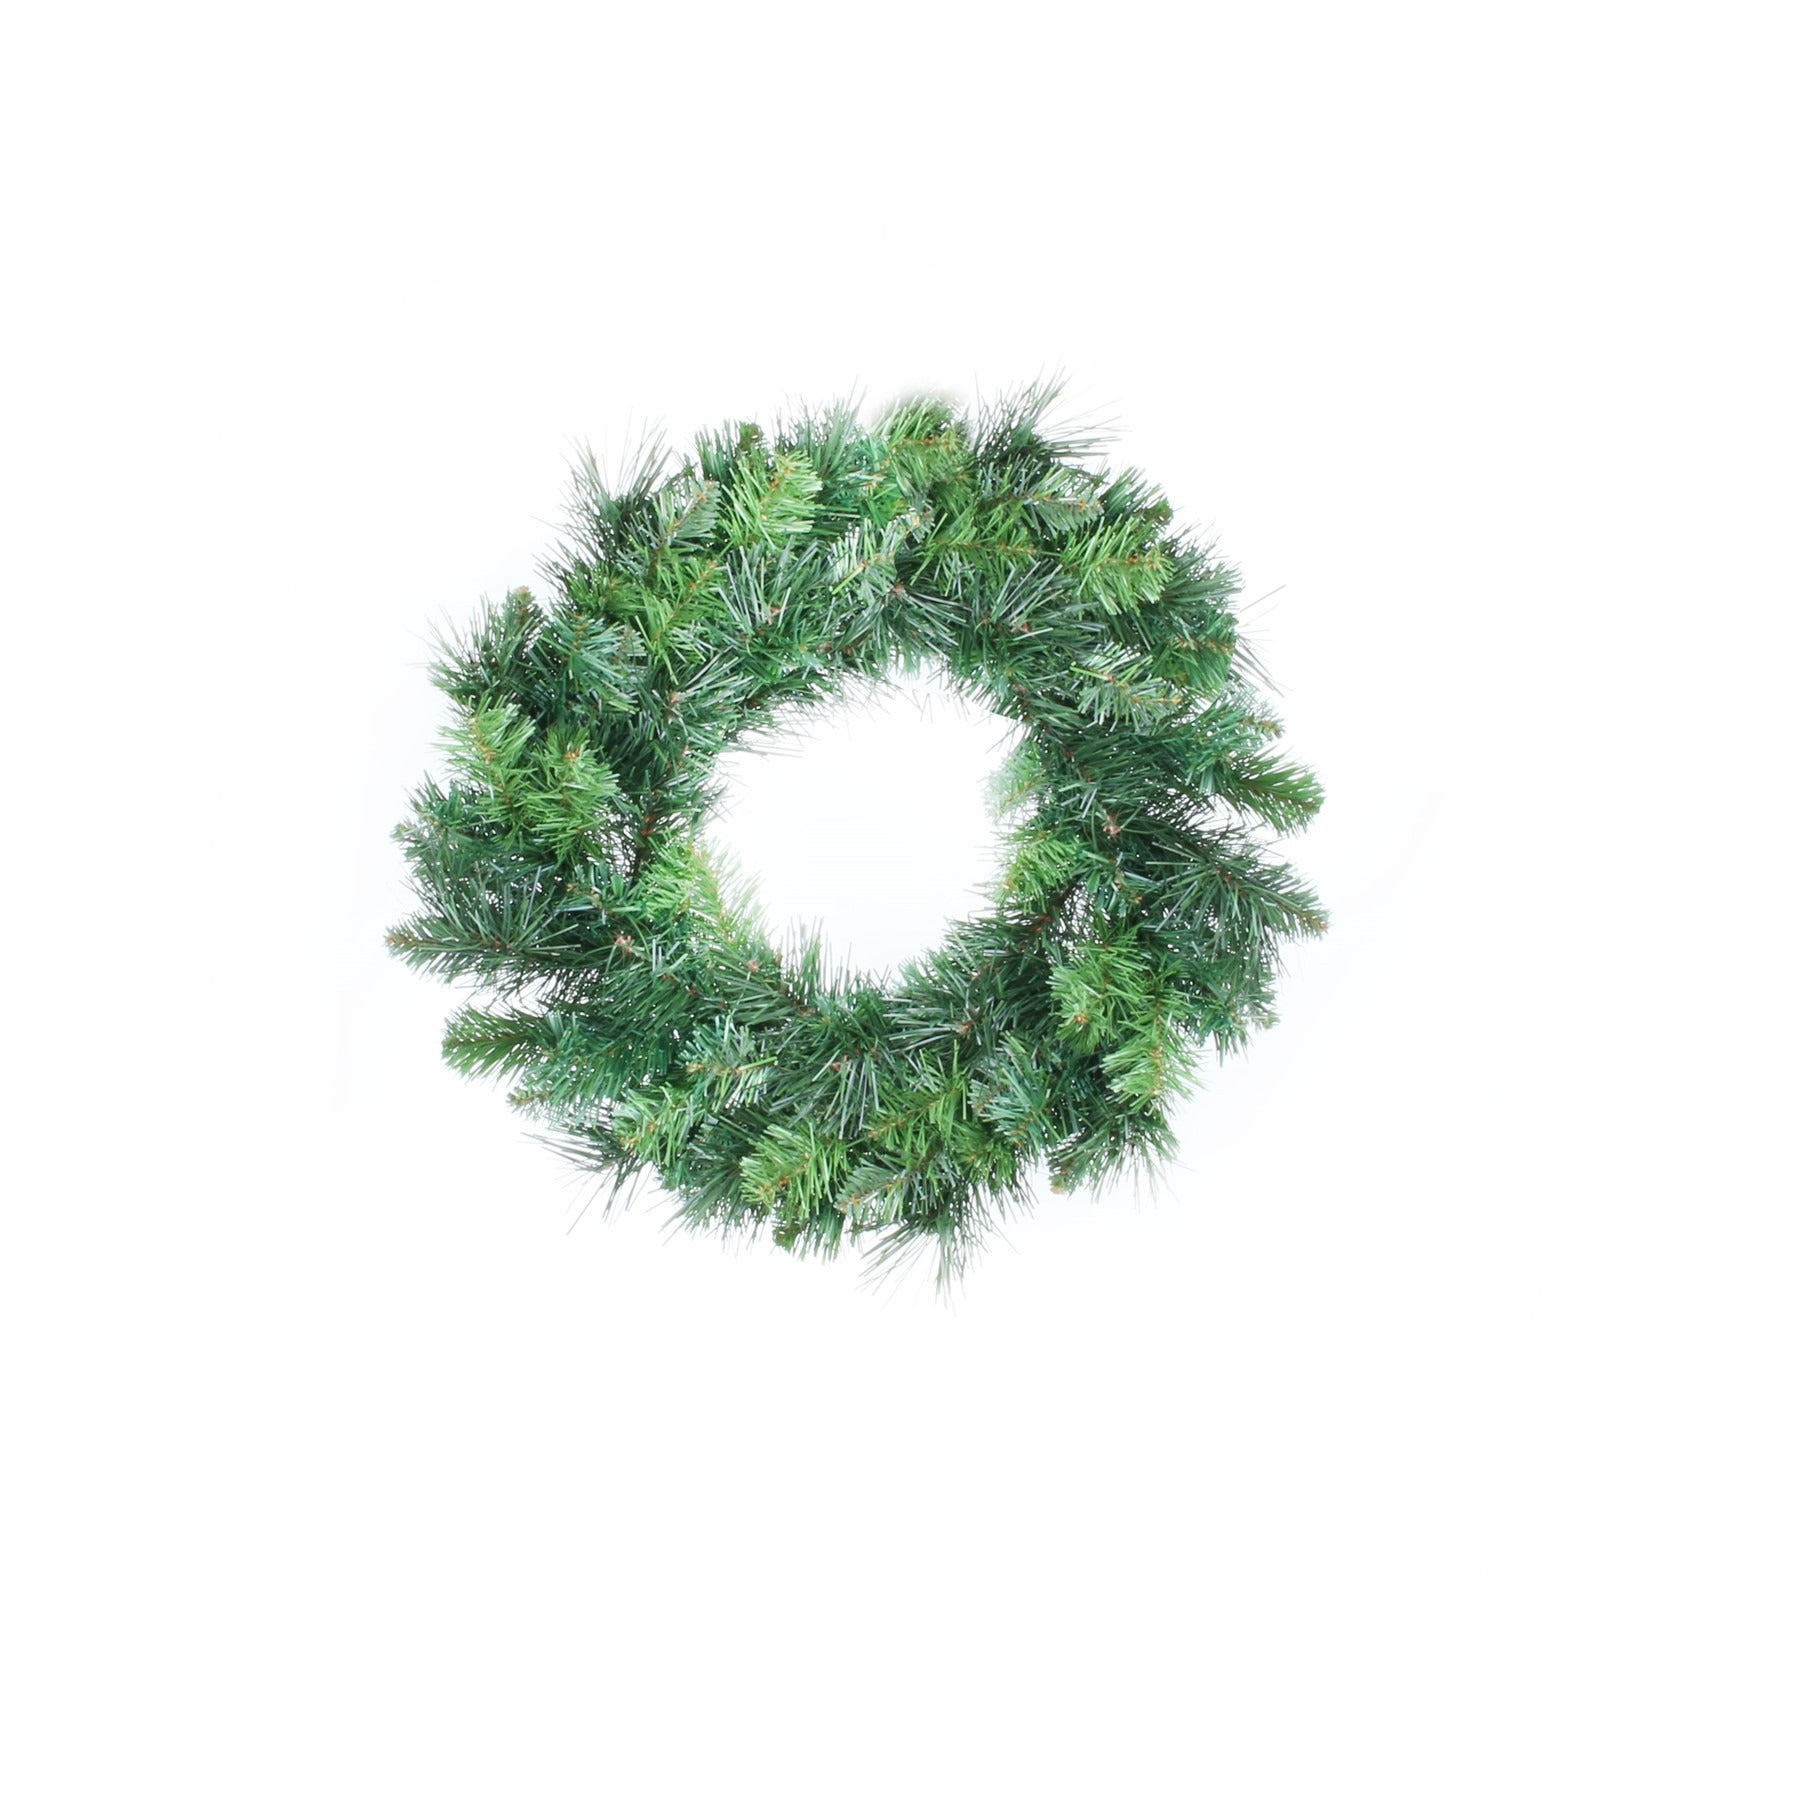 View Deluxe Evergreen Greenery Wreath 40cm information